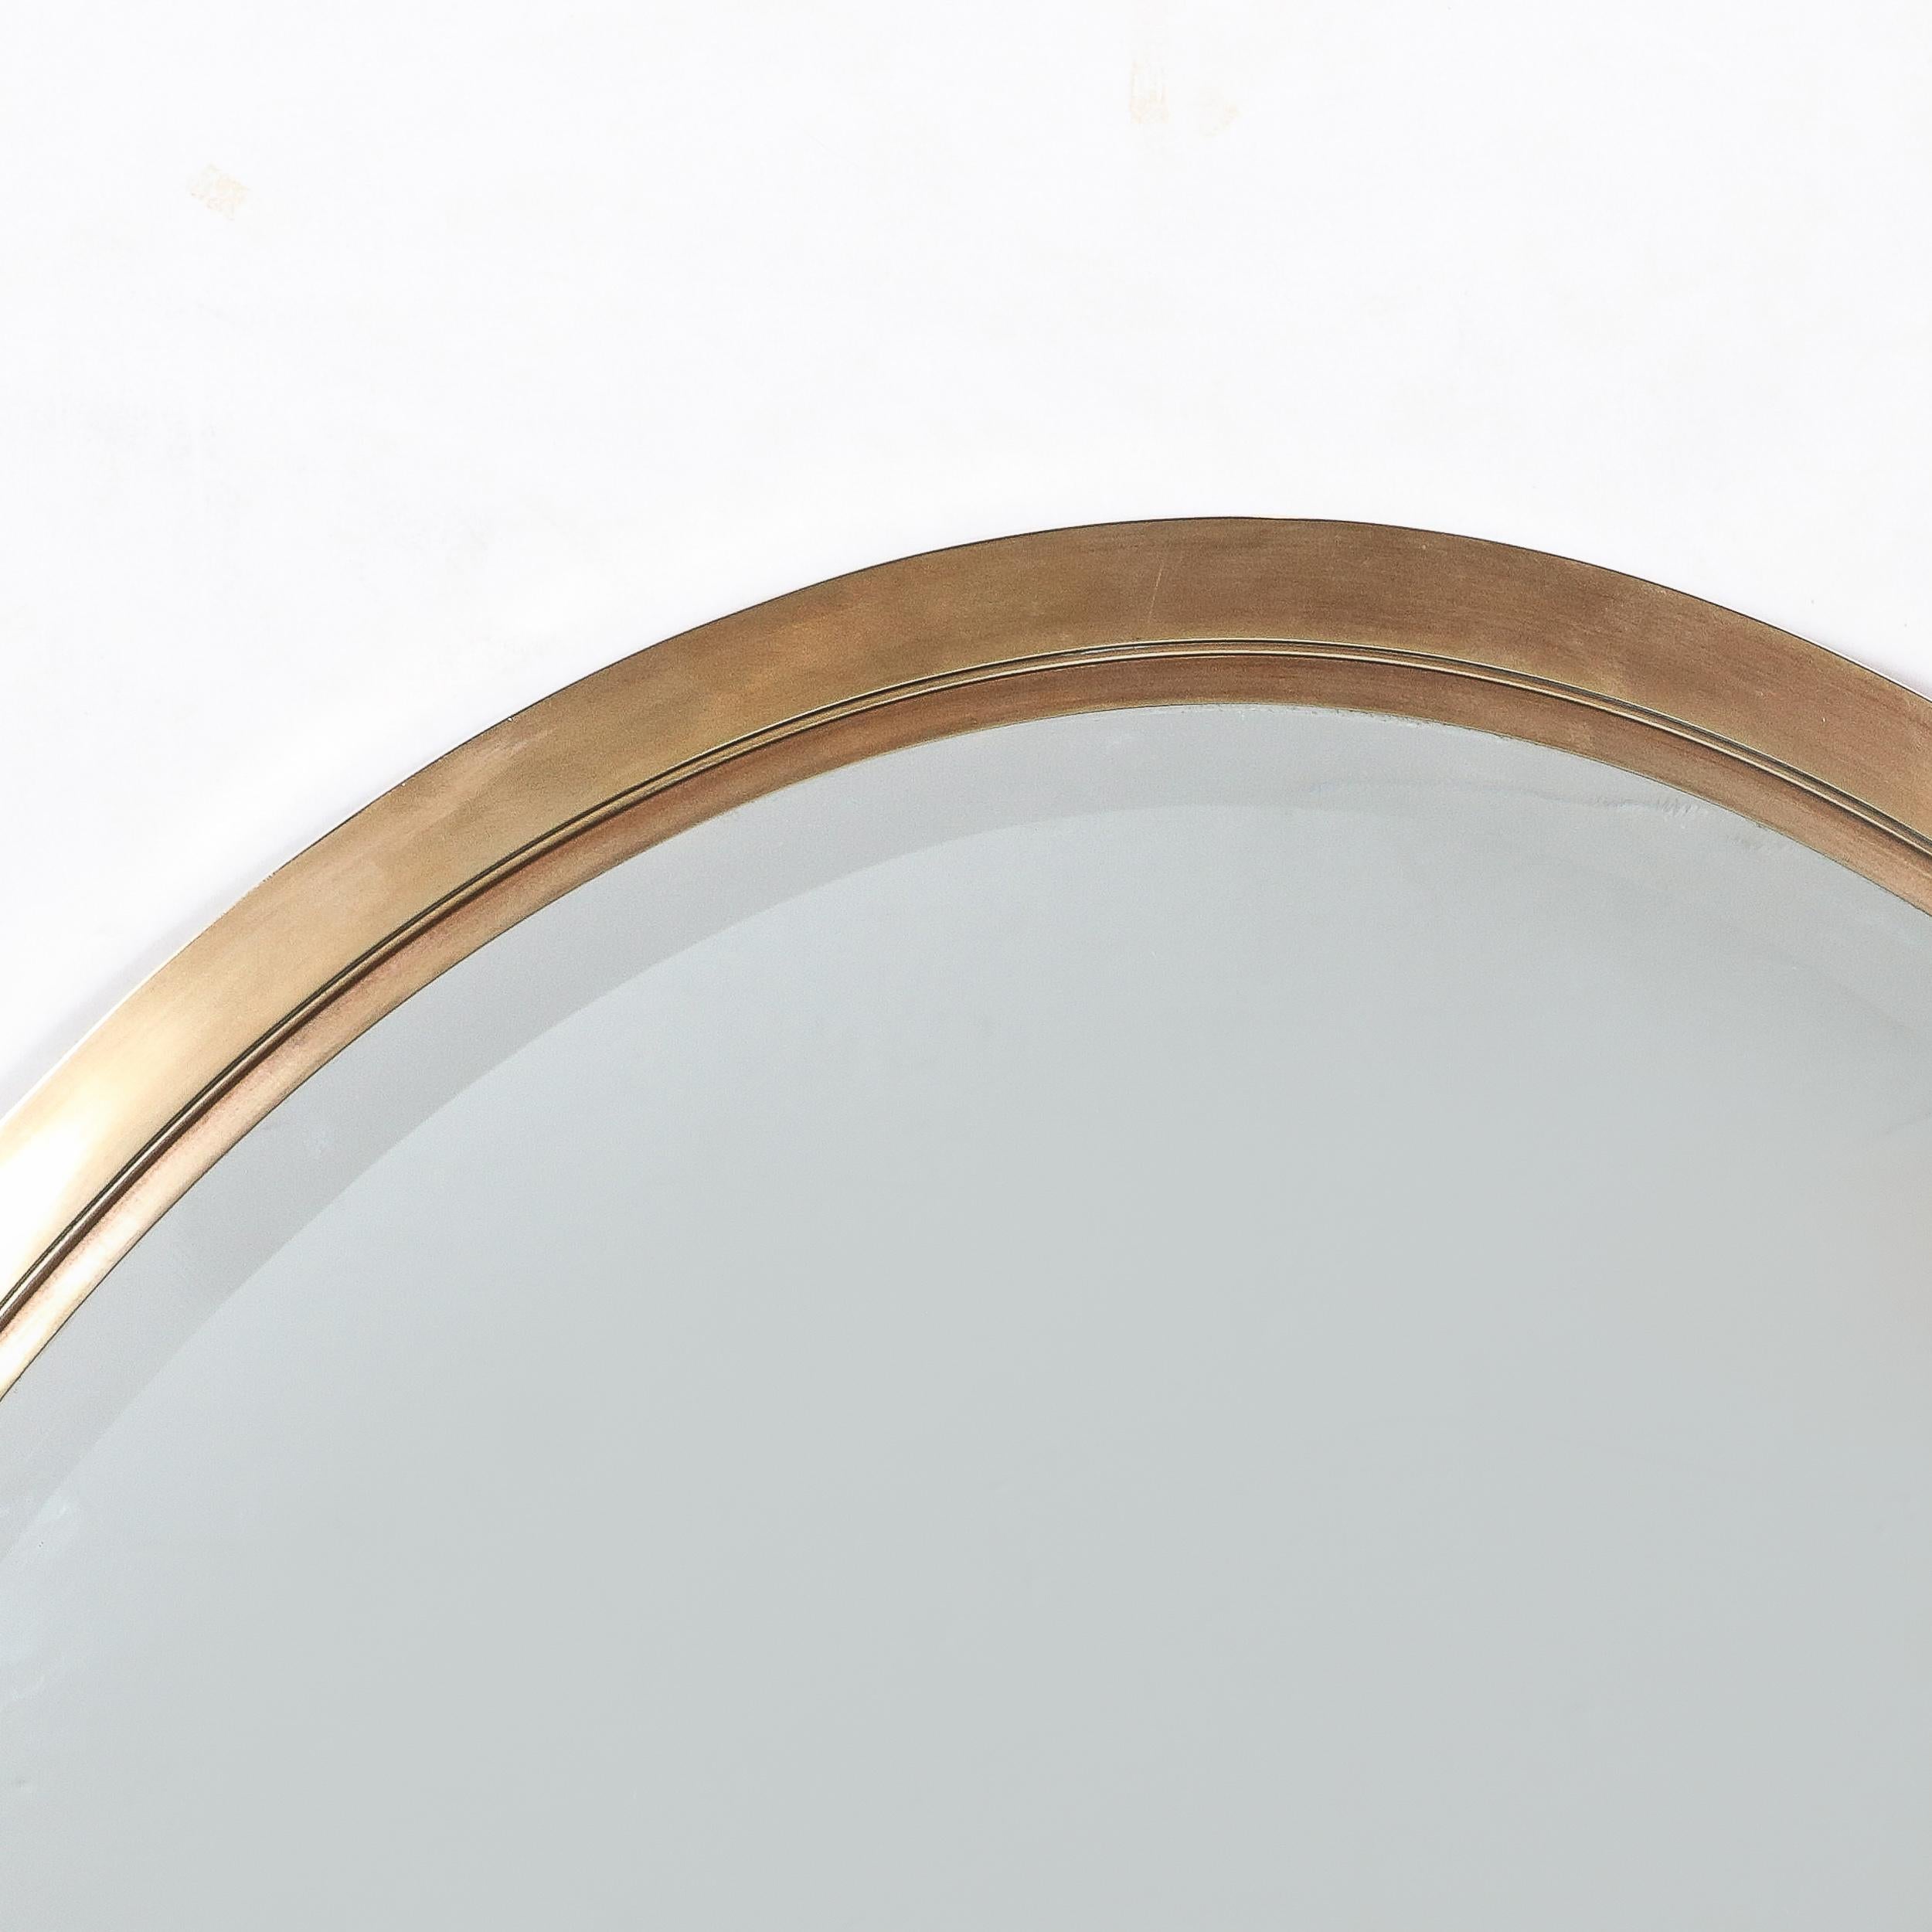 American Mid-Century Modernist Oval Mirror with Polished Brass Frame For Sale